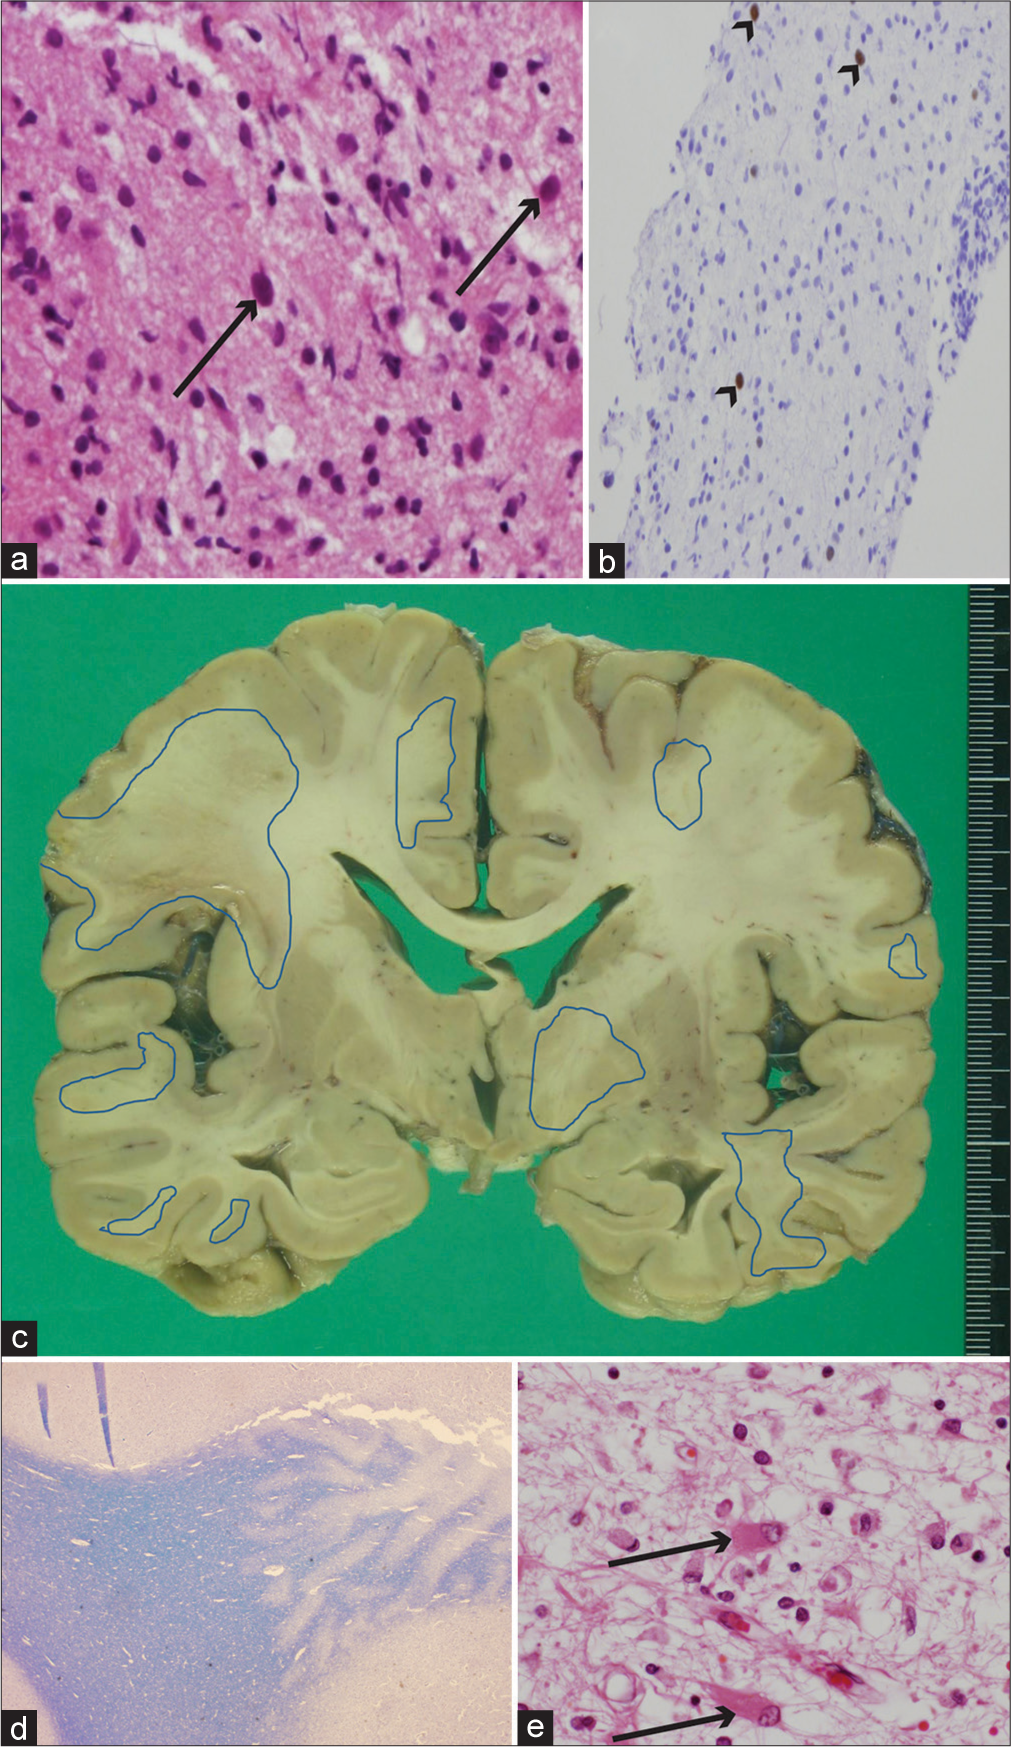 (a and b) Brain biopsy histopathological, and postmortem (c) brain and (d and e) histopathological findings. (a) Enlarged glial cell nuclei (arrows) can be seen in the background demyelination along with macrophage migration (hematoxylin and eosin [HE] staining, ×400). (b) Immunohistochemistry for the Simian virus 40 (SV 40) antigen showed positive findings for glial cell nucleoli (arrowheads) (SV 40 stain, ×200). (c) Postmortem image of coronal section of brain showing multiple foci with brownish pigmentation, predominantly in subcortical white matter. Regions encircled with blue lines indicate histologically proven demyelination lesions. (d) Gross findings of demyelination in subcortical white matter (right side of panel) (Kluver-Barrera staining, ×12.5). (e) Arrows show glial cells with eccentric enlarged nuclei in eosinophilic cytoplasm (HE staining, ×400).